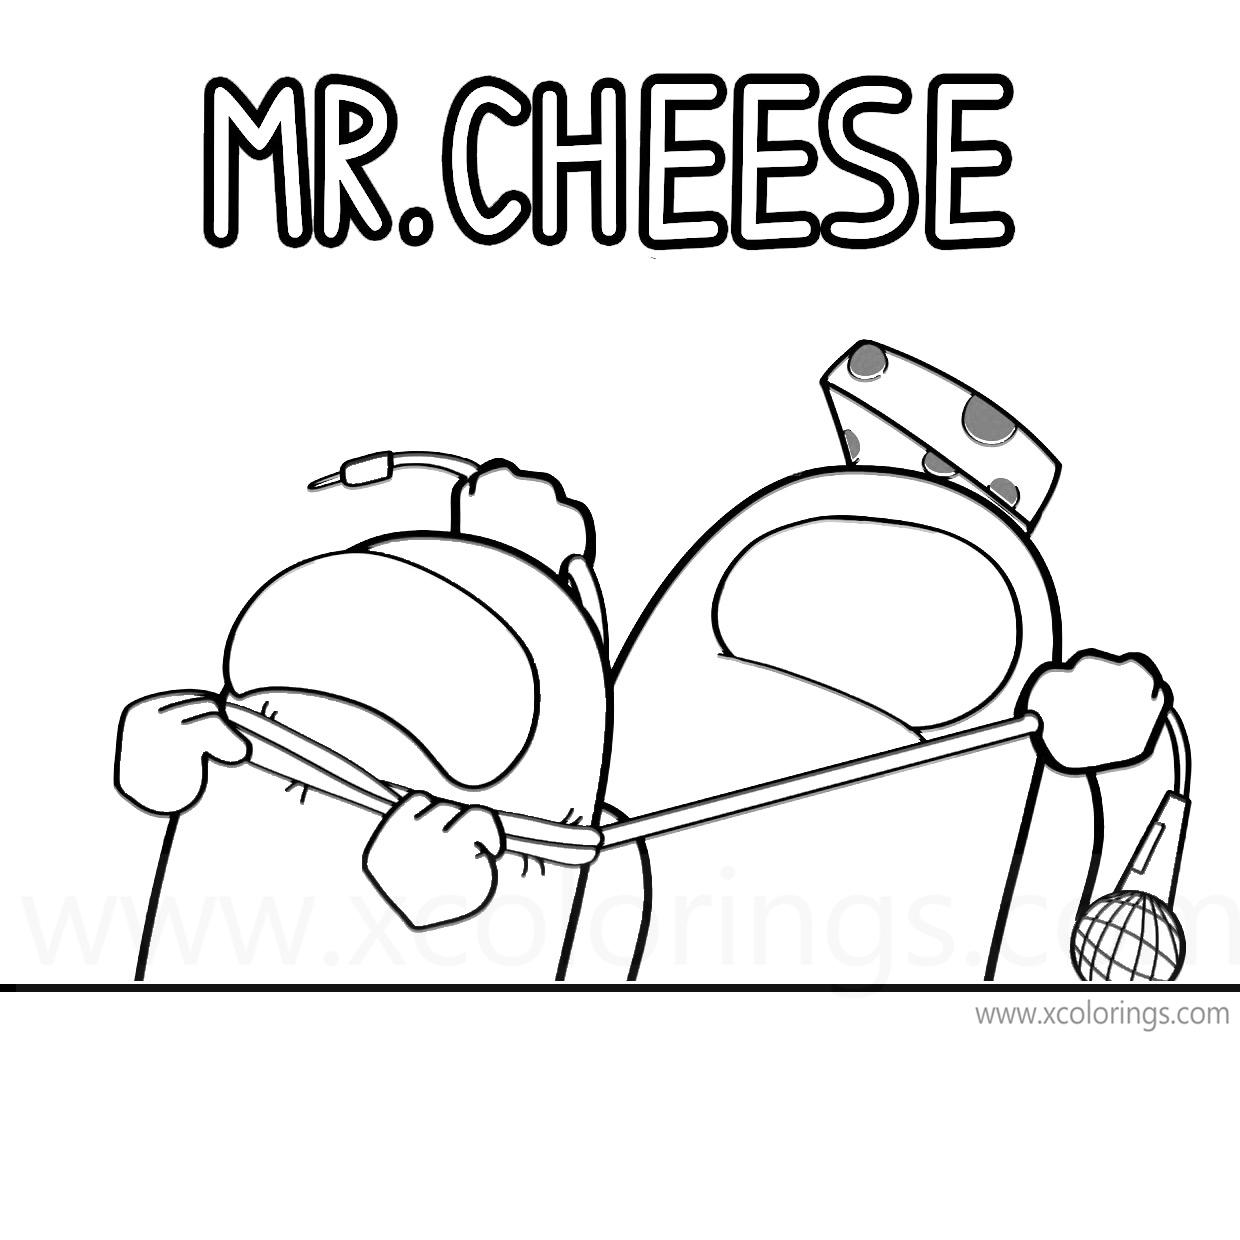 Free Among Us Coloring Pages Song No One Suspects Mr. Cheese printable